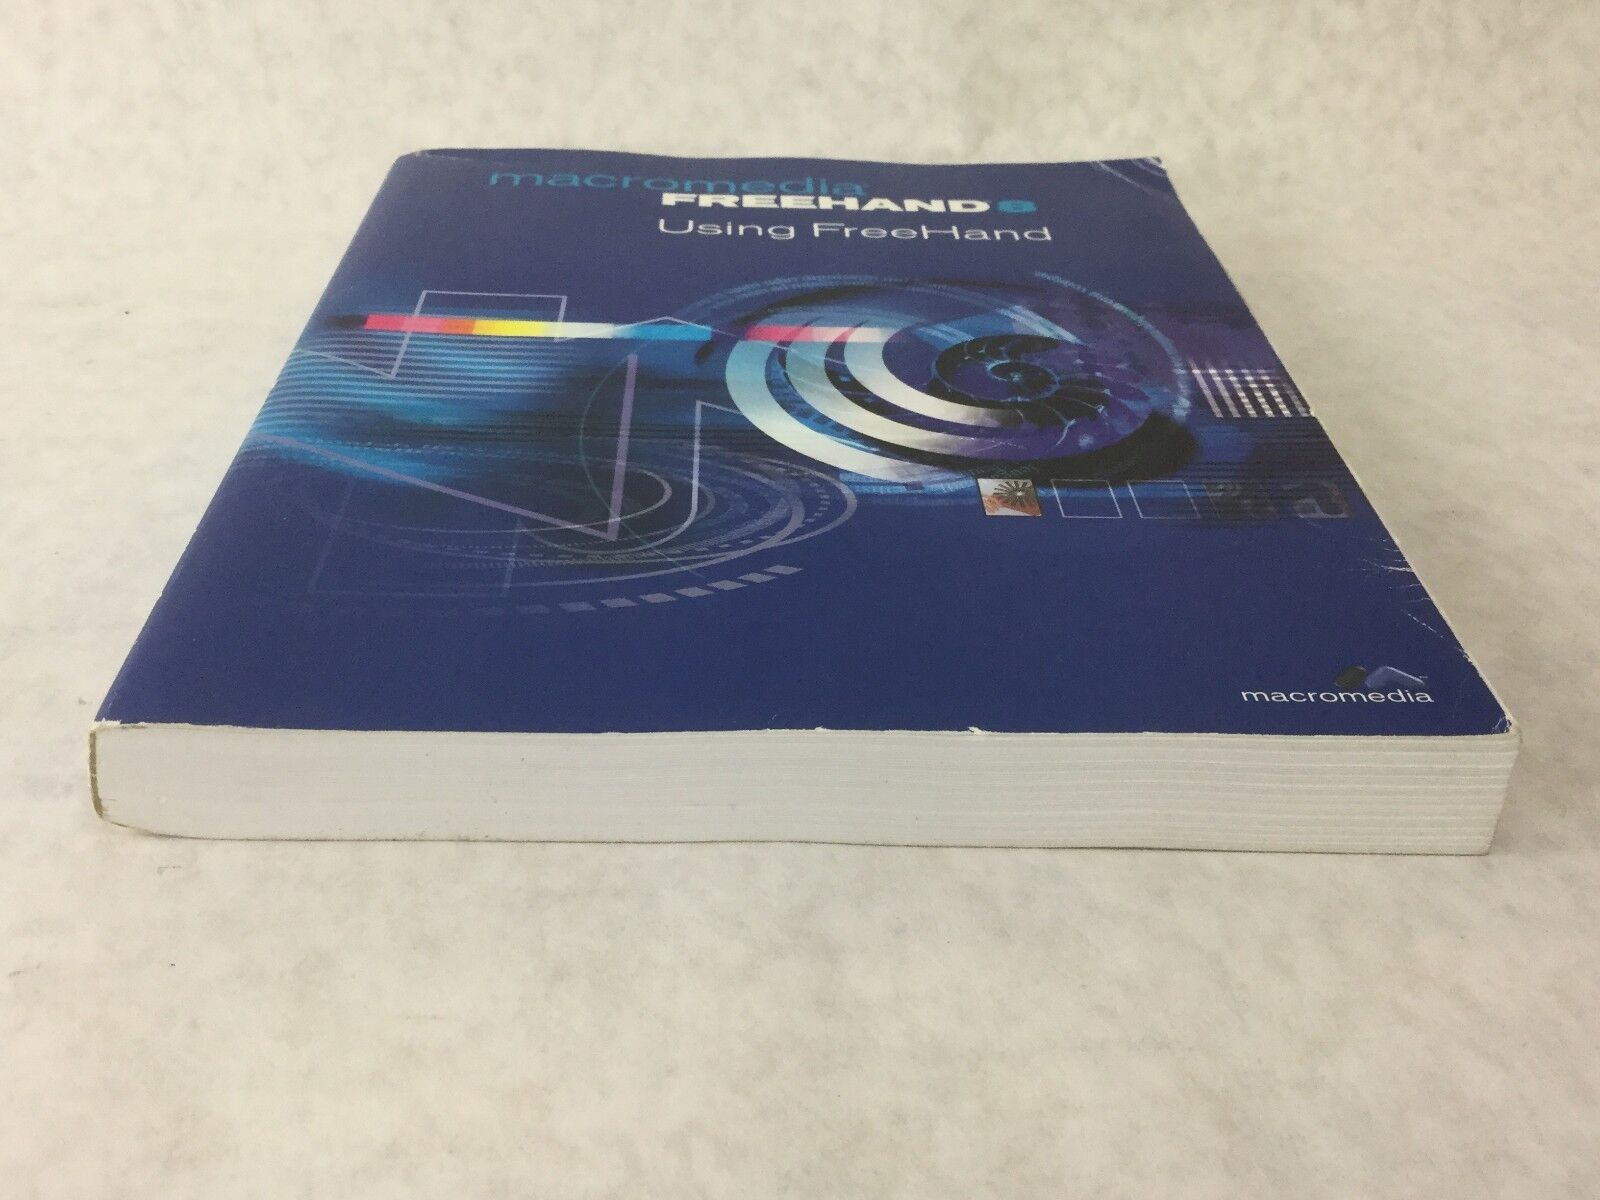 Macromedia Freehand 8 Using Freehand Softcover